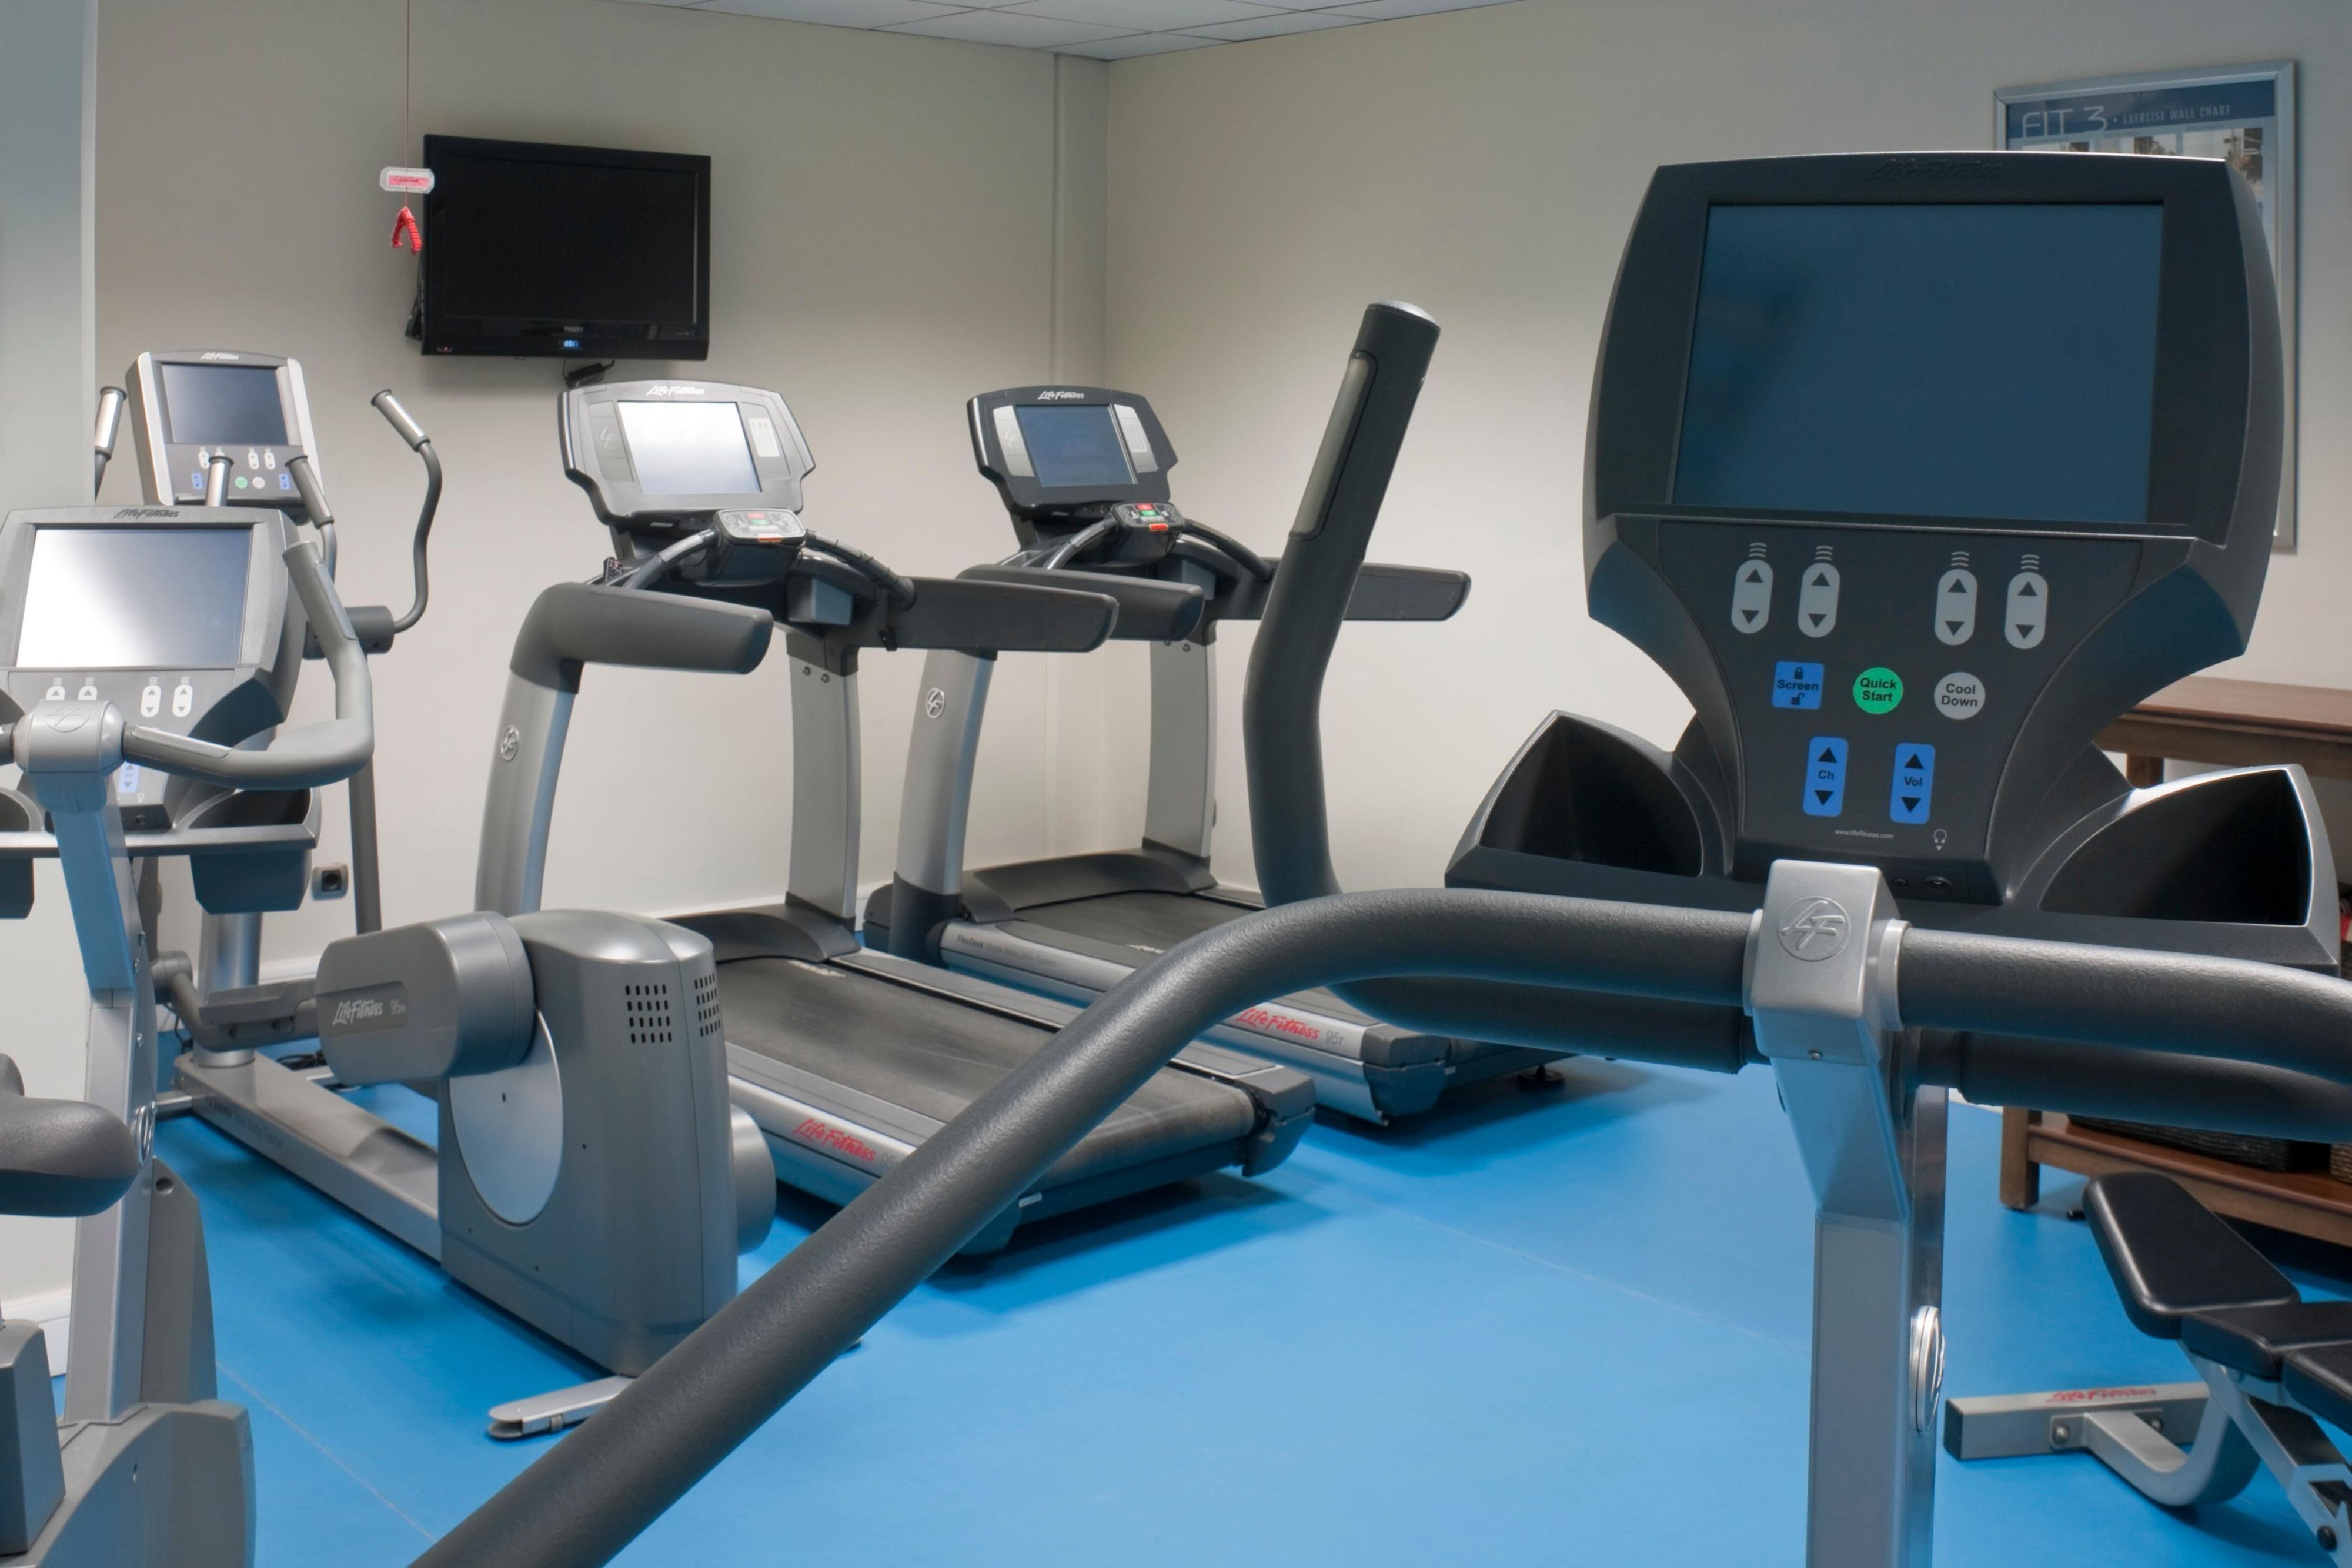 Being away from home doesn’t have to mean missing out on your exercise.
We have a large Fitness Room with everything you need for a full work out or a nice cool down. 
Please register at reception for access.